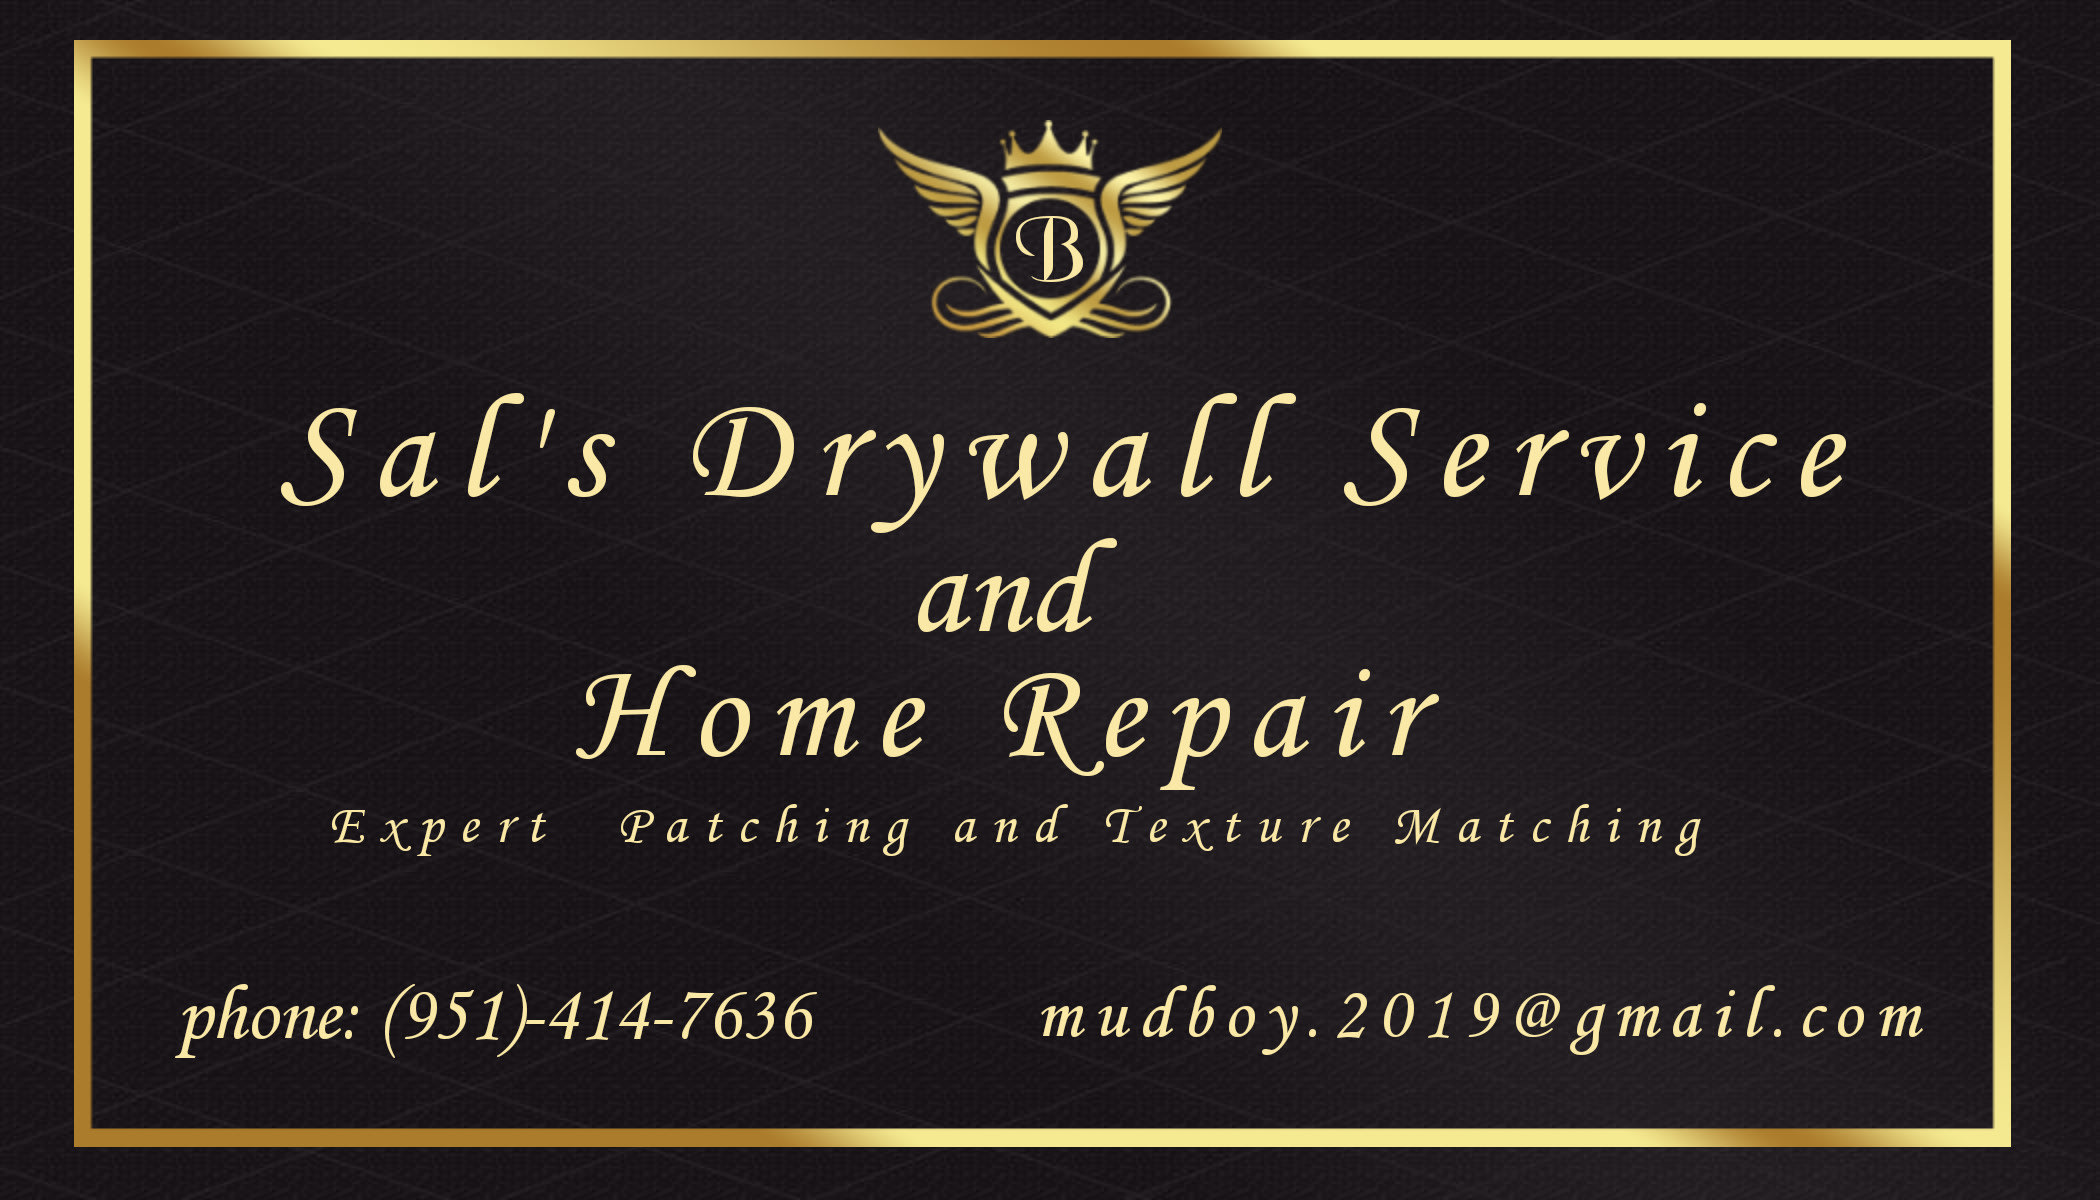 Sal's Drywall Service and Home Repair